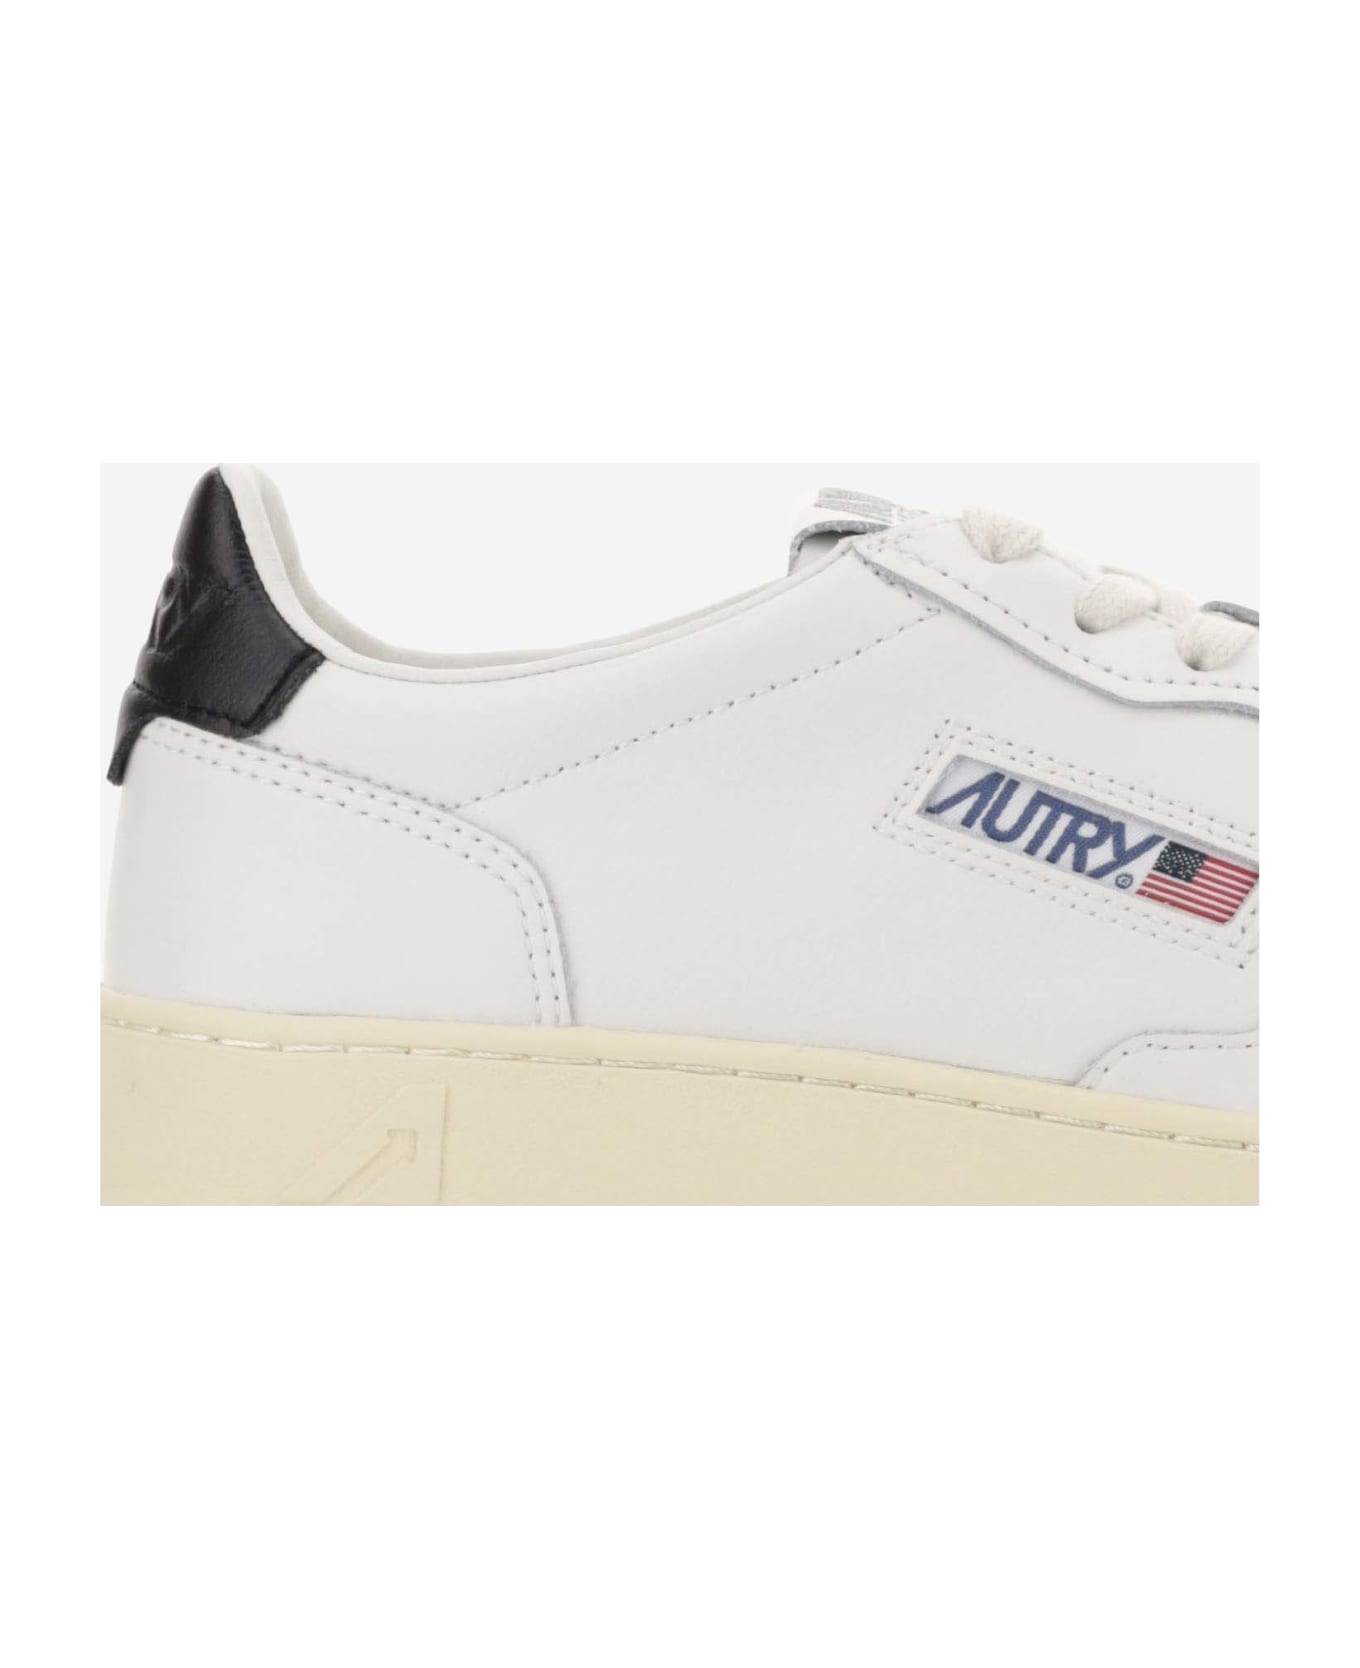 Autry Low Medalist Sneakers - WHT/BLACK スニーカー